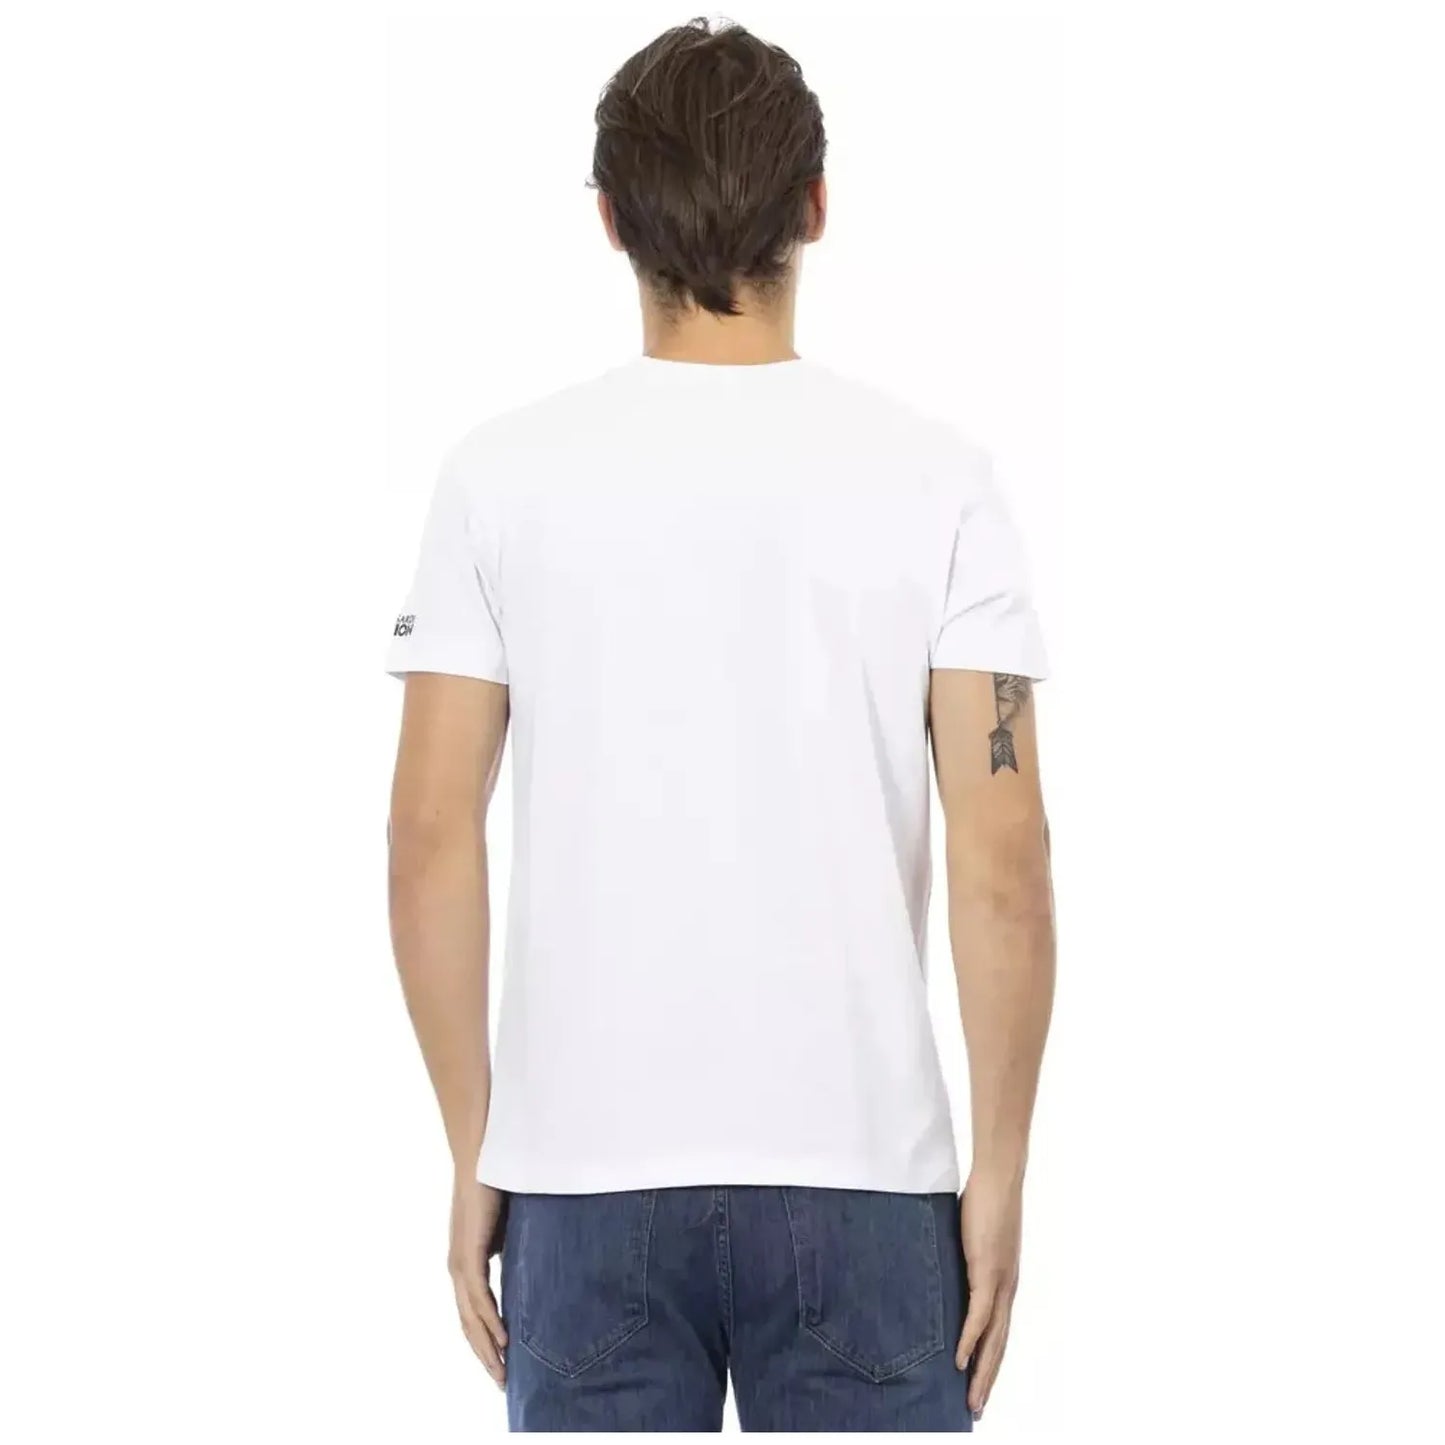 Trussardi Action Elegant V-Neck Tee with Chic Front Print white-cotton-t-shirt-68